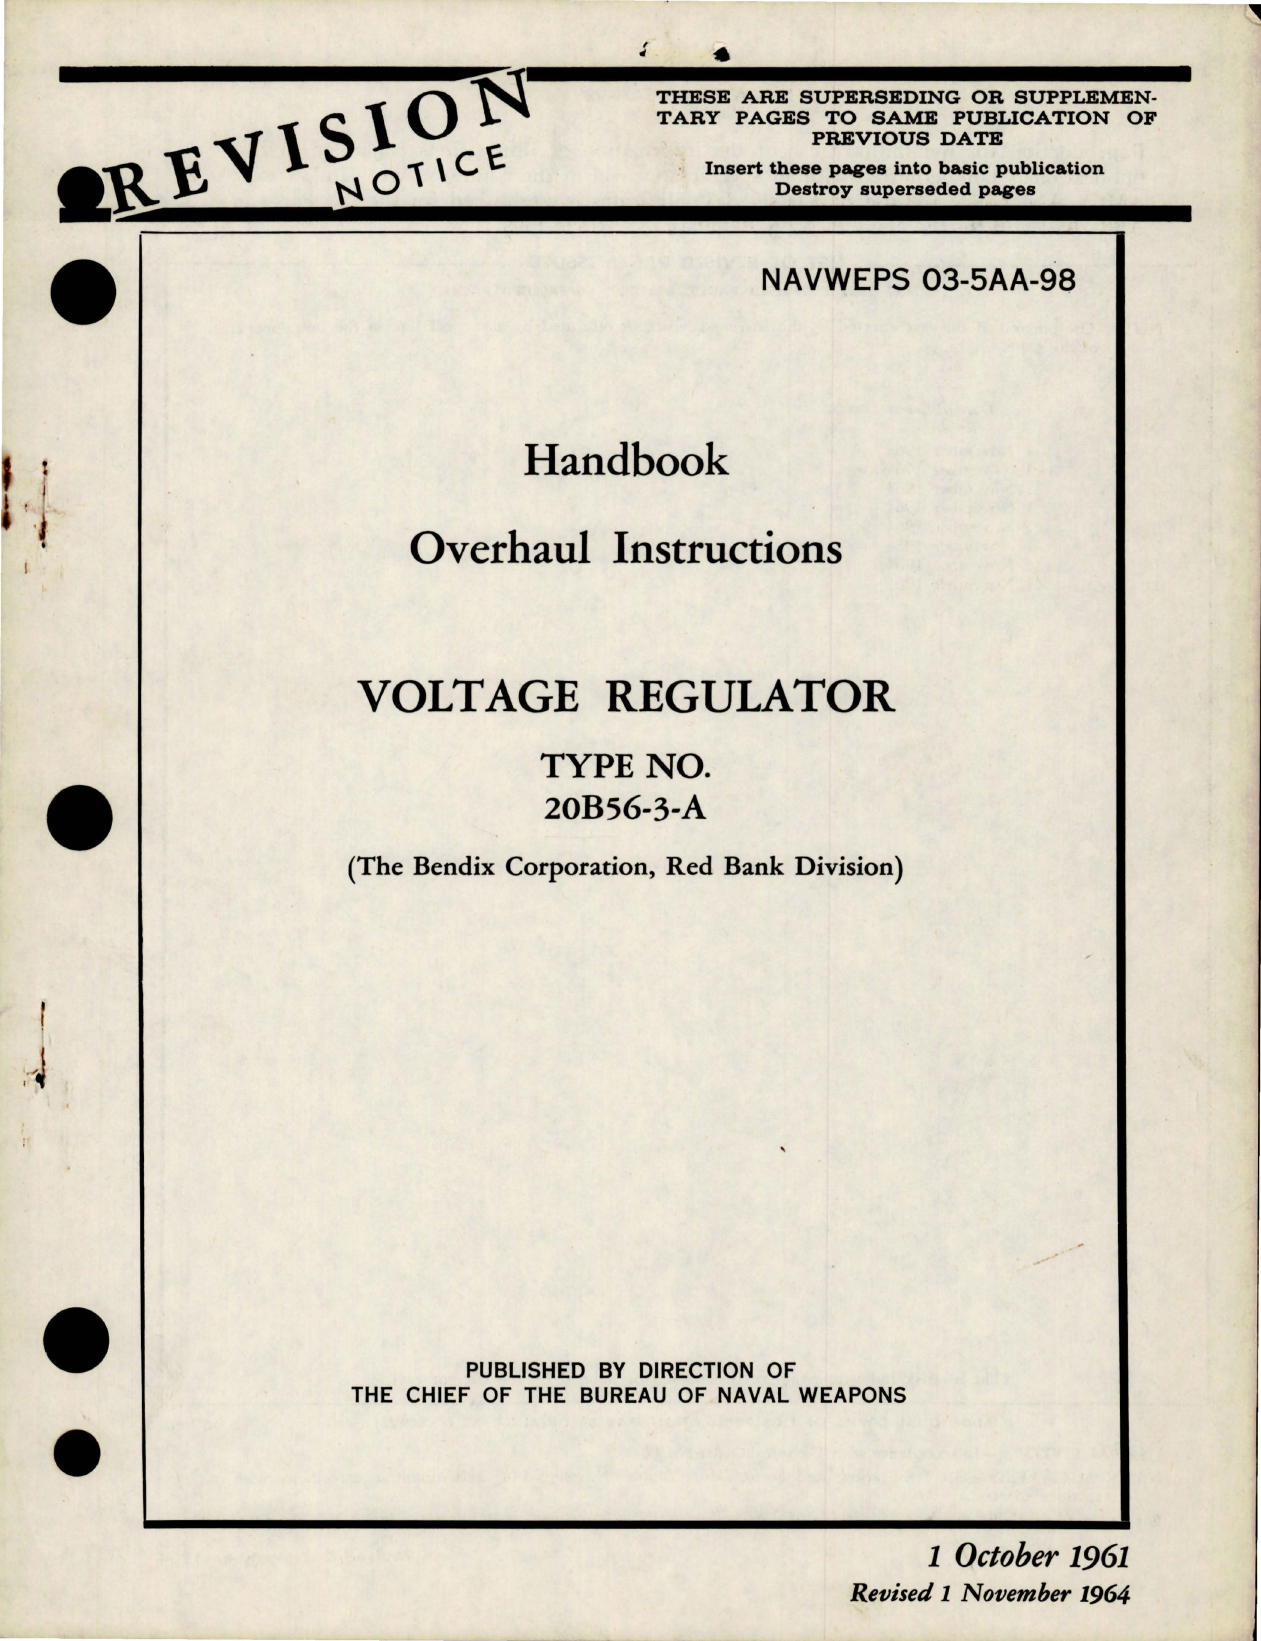 Sample page 1 from AirCorps Library document: Overhaul Instructions for Voltage Regulator - Type 20B56-3-A